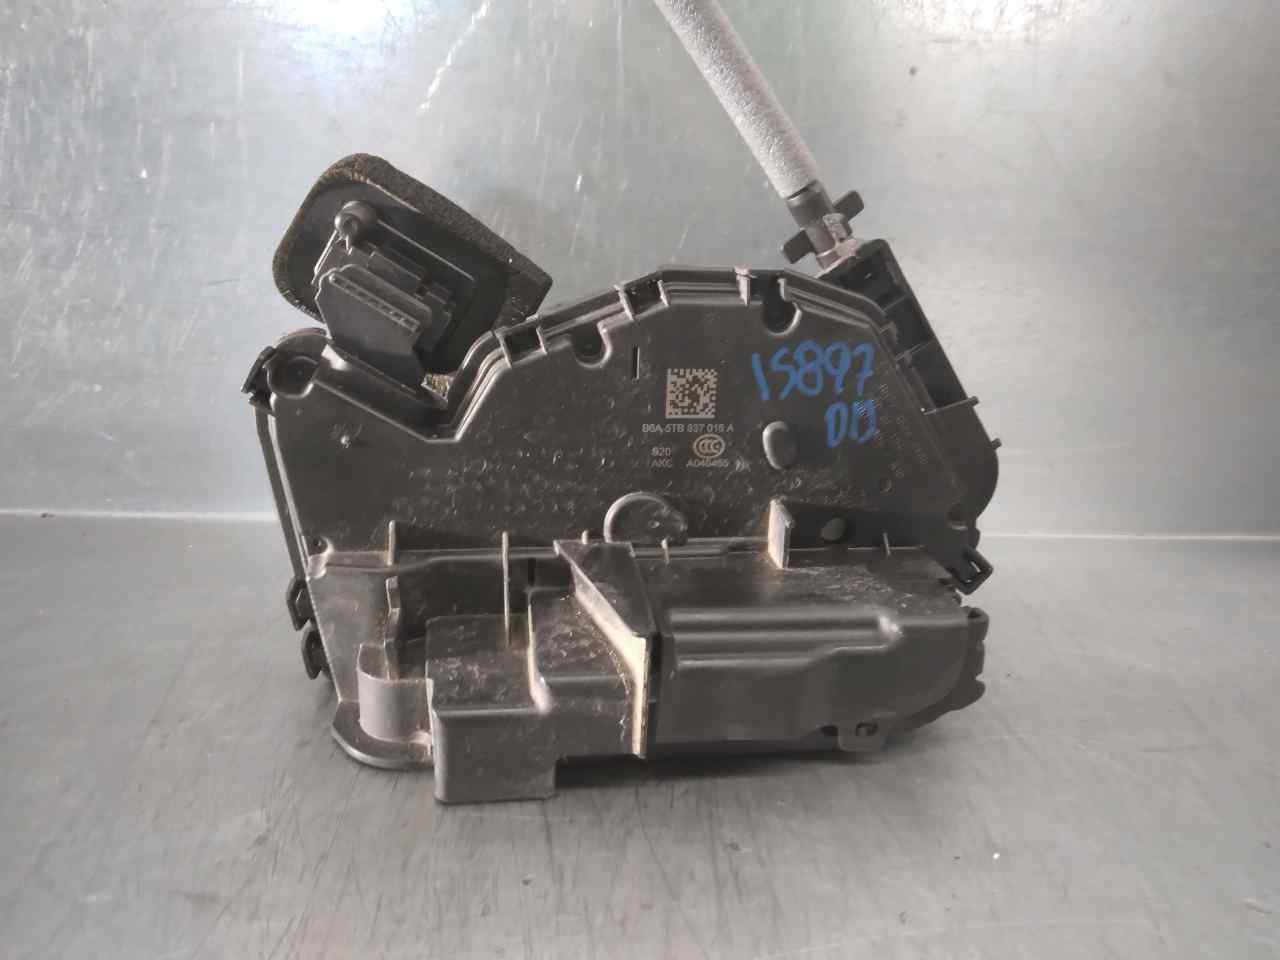 SEAT Alhambra 2 generation (2010-2021) Front Right Door Lock B6A5TB837016A, 7PINES, 5PUERTAS 19820688